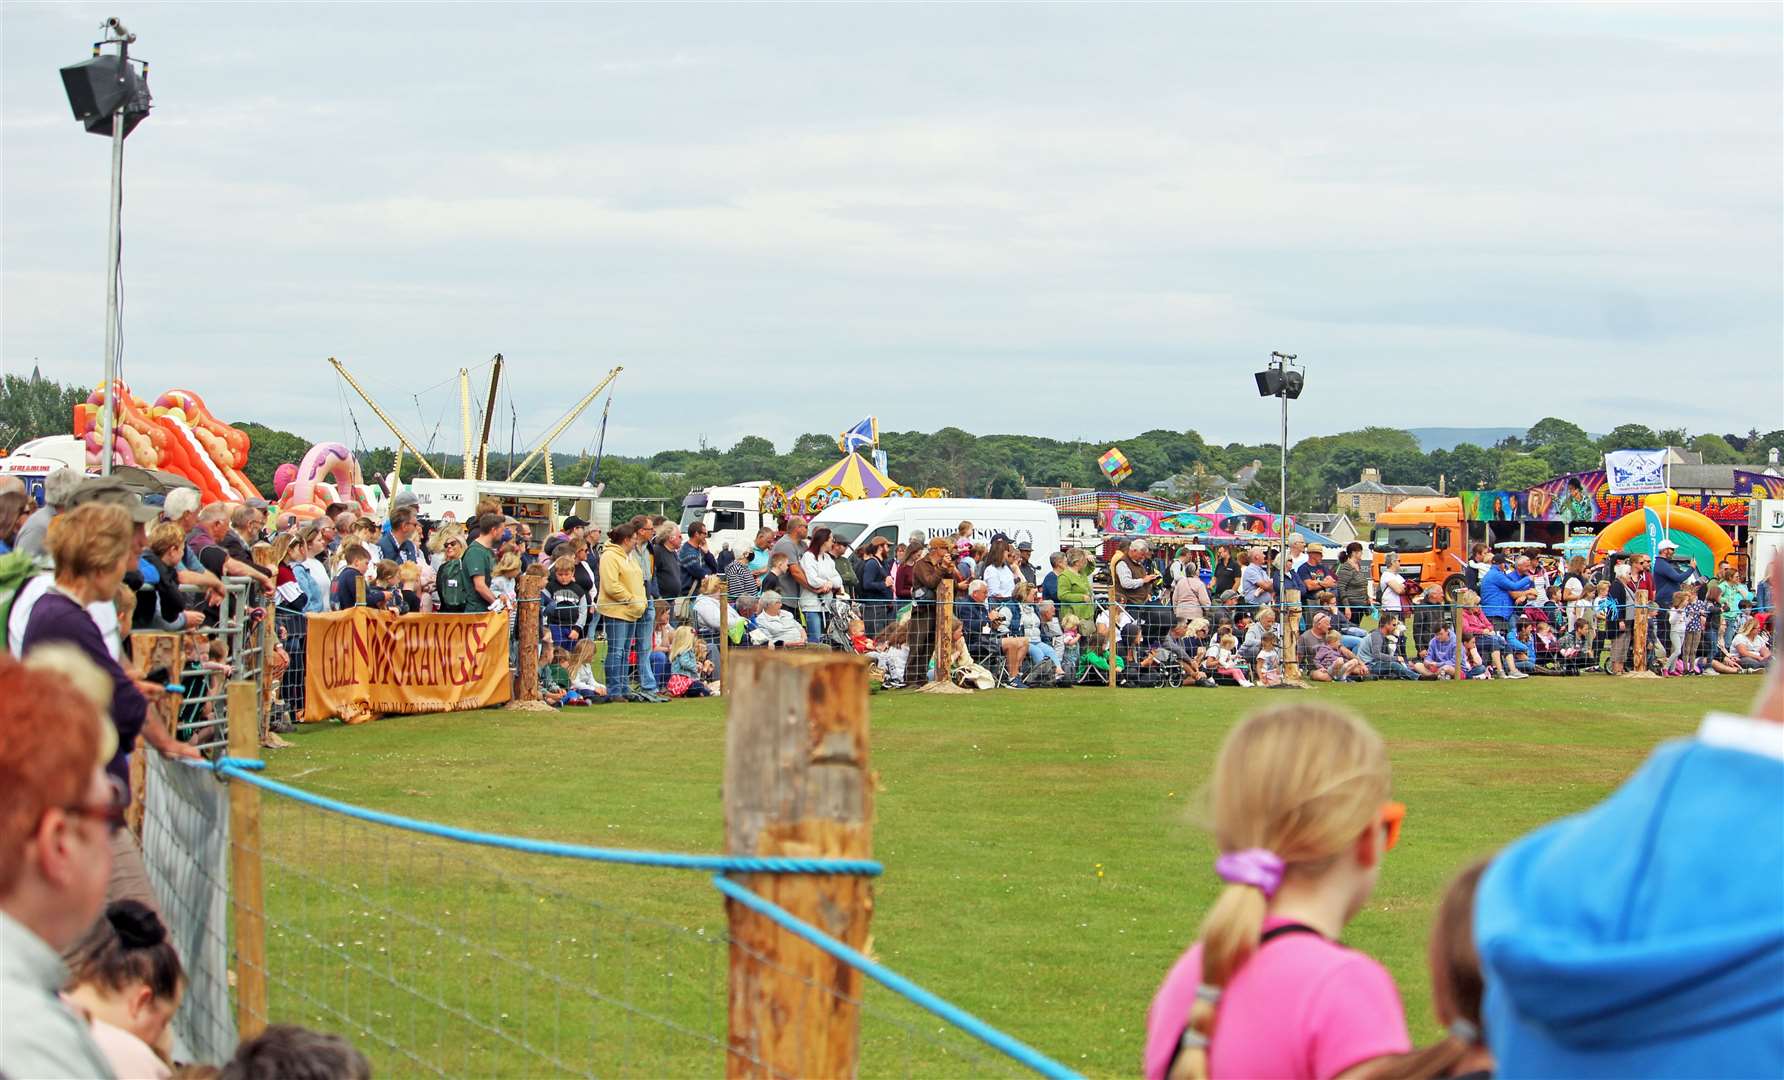 A record crowd of over 6000 attended this year's event. Photo: Niall Harkiss